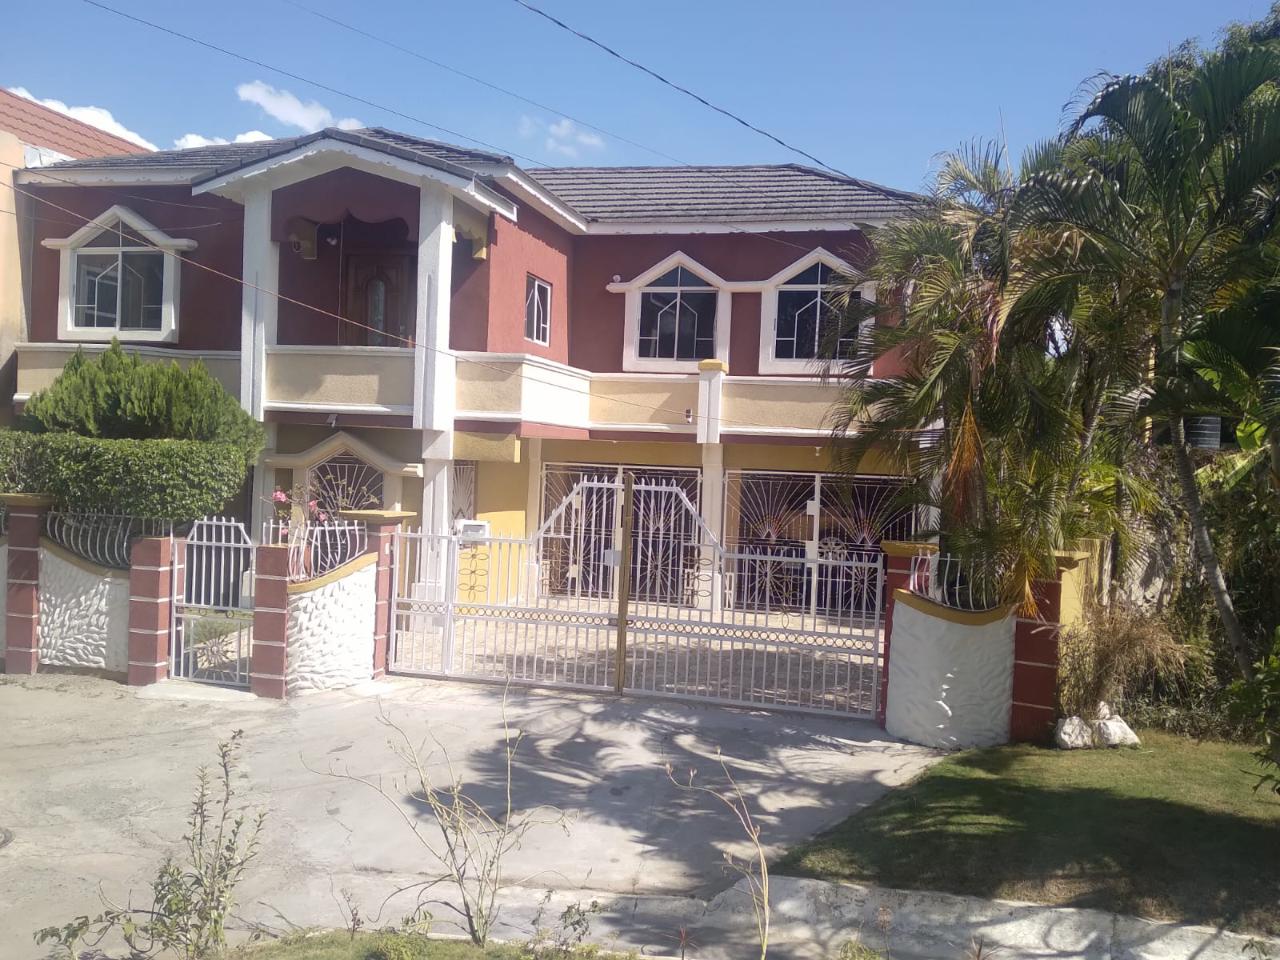 House For Rent: WEST CUMBERLAND, Greater Portmore | $75,000